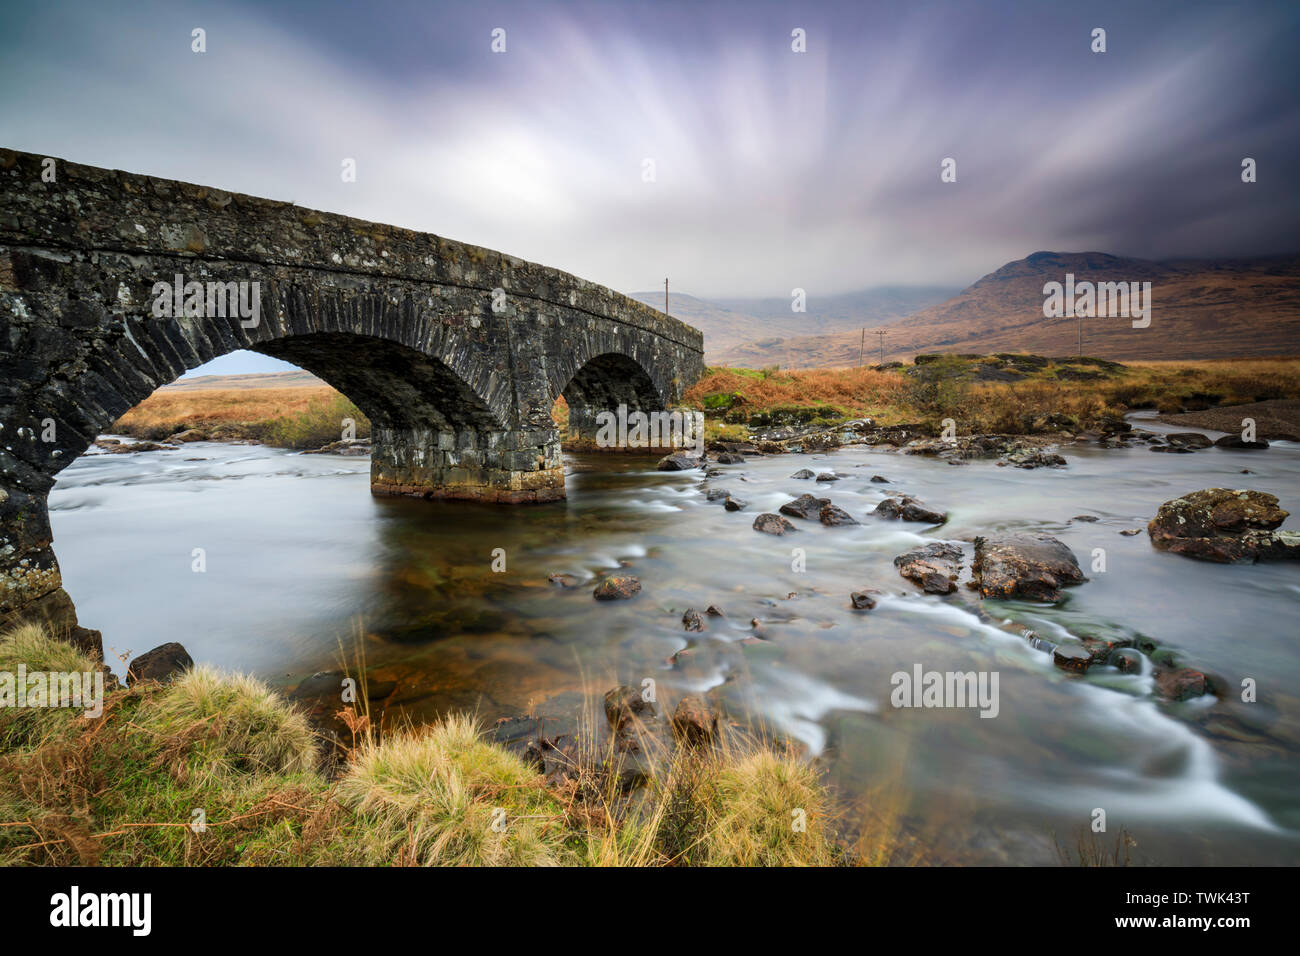 A bridge over the Coladoir River, near the head of Loch Scridain on the Isle of Mull. Stock Photo